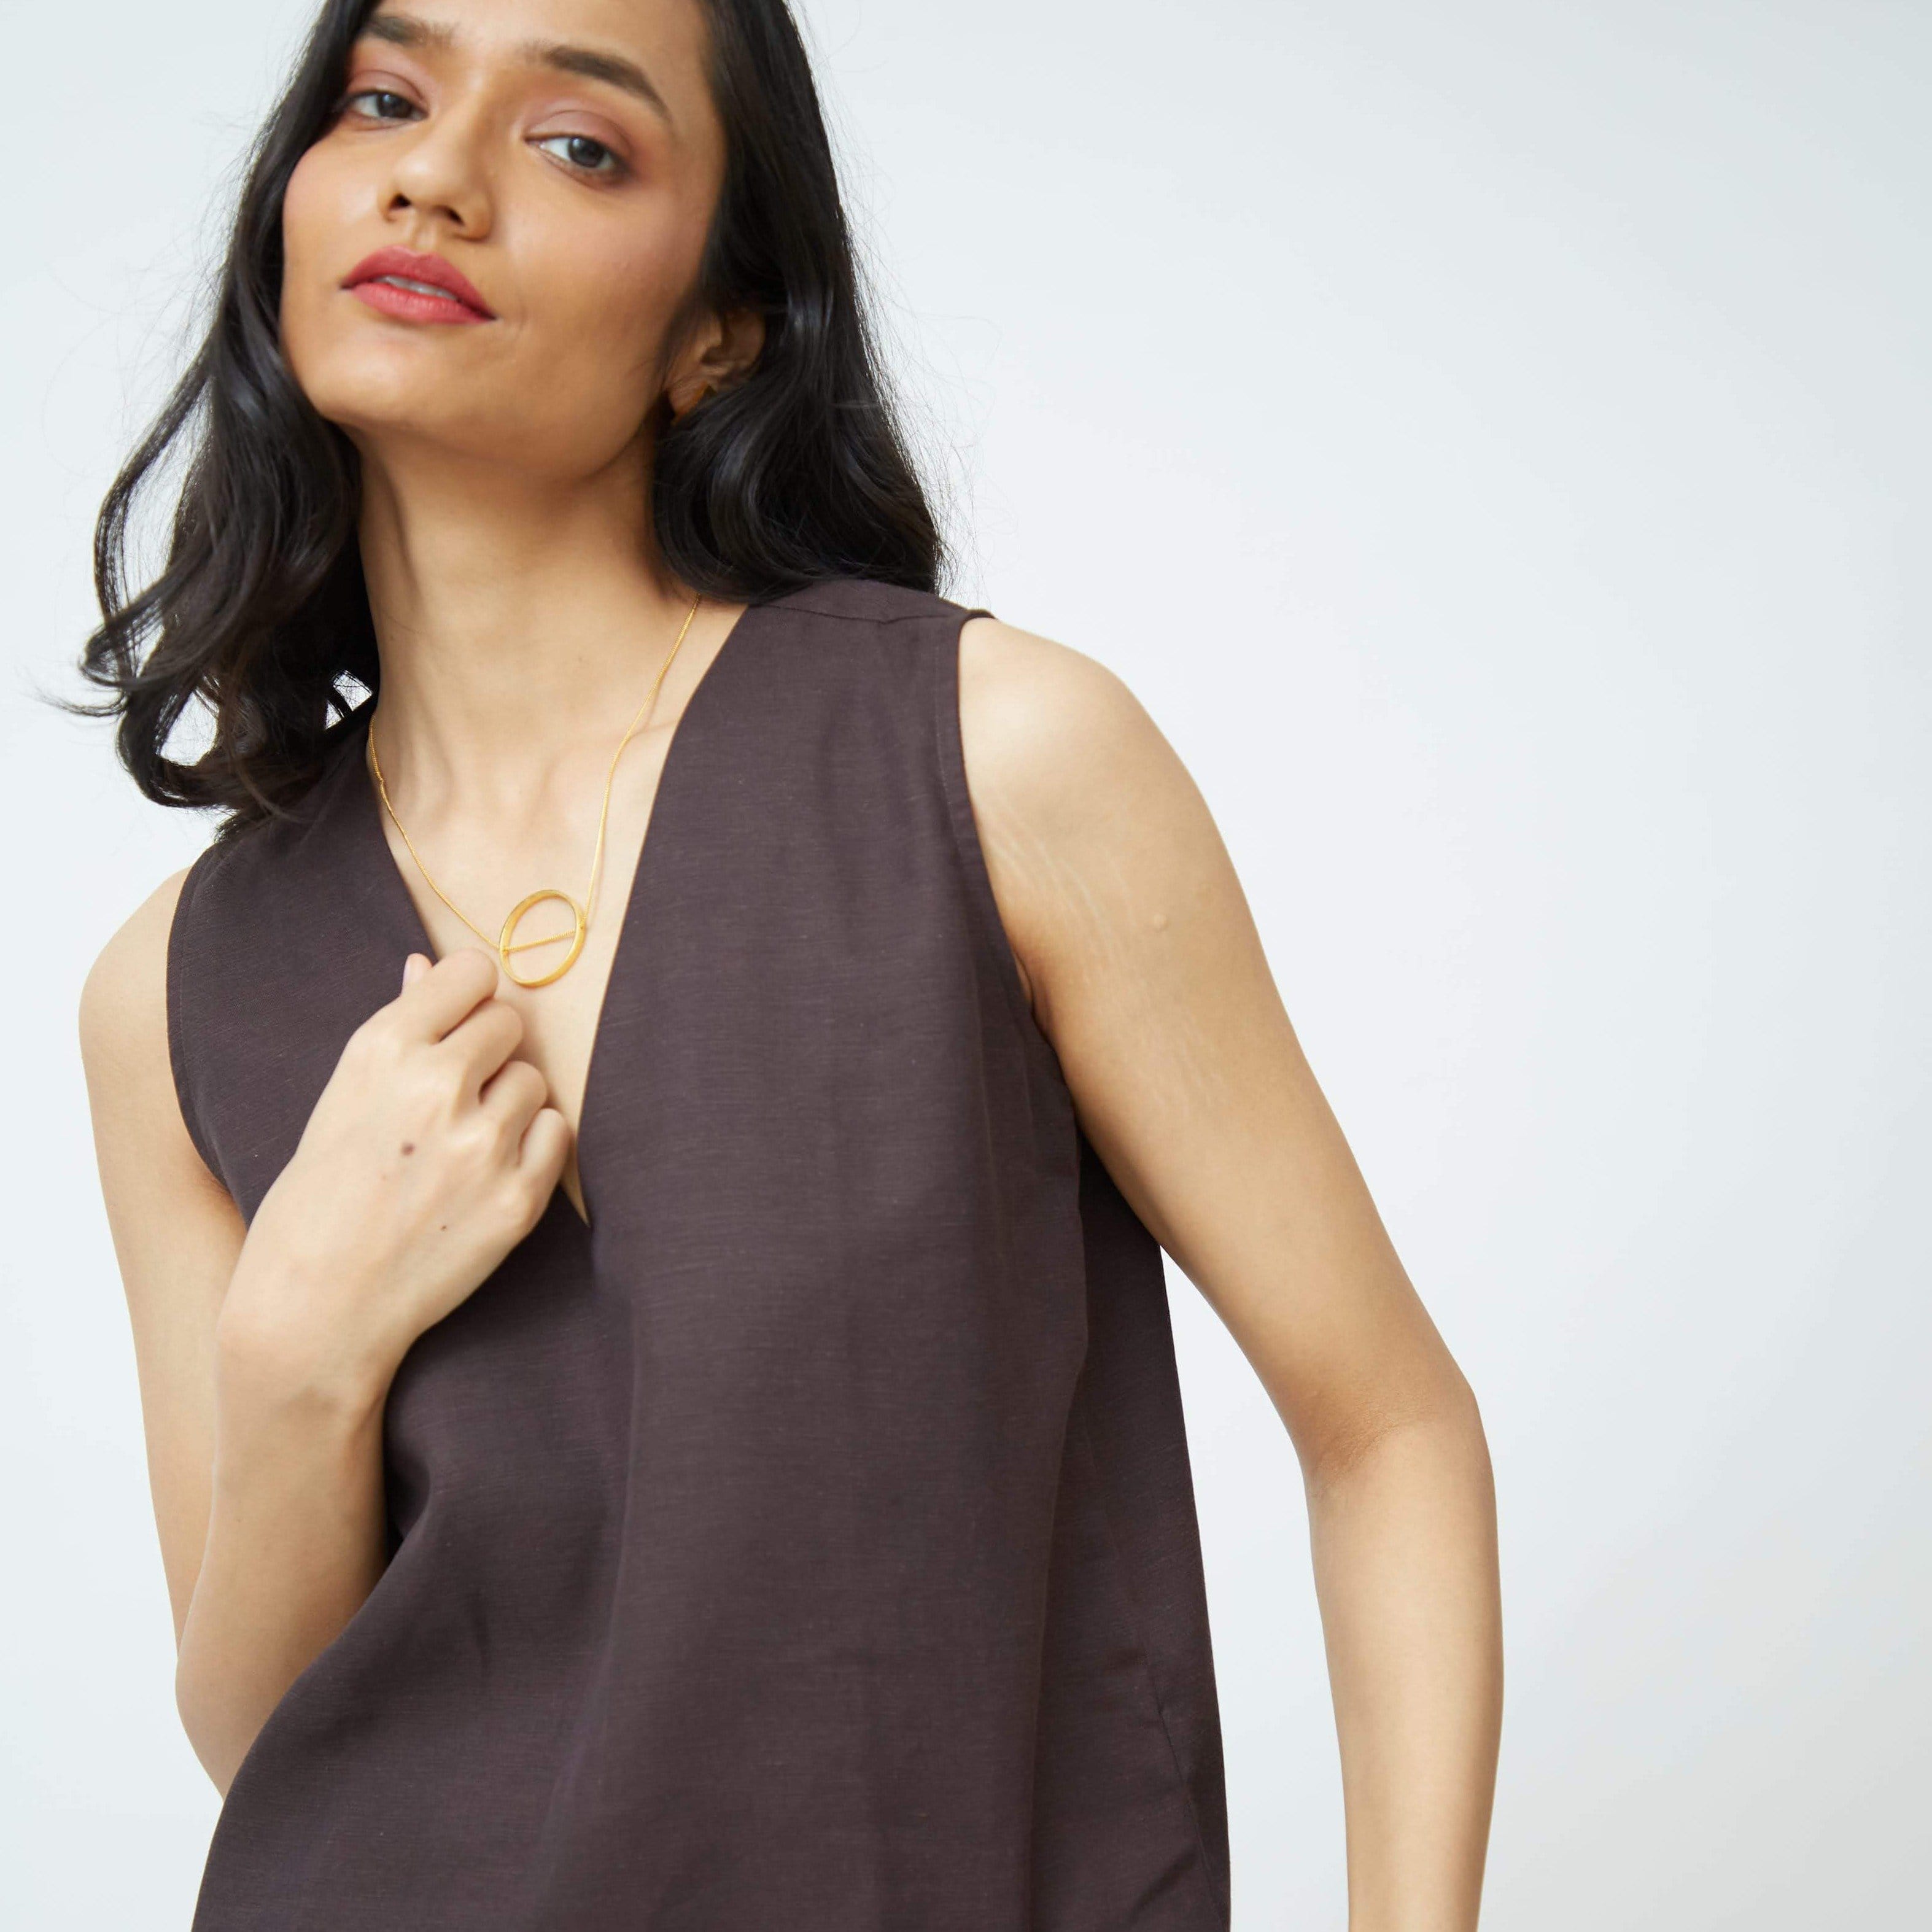 Saltpetre womens wear, indo-western shell top with v-shaped neck in coffee brown for semi formal, casual, occassional wear. Comfortably elegant woth delivate feminine straps.